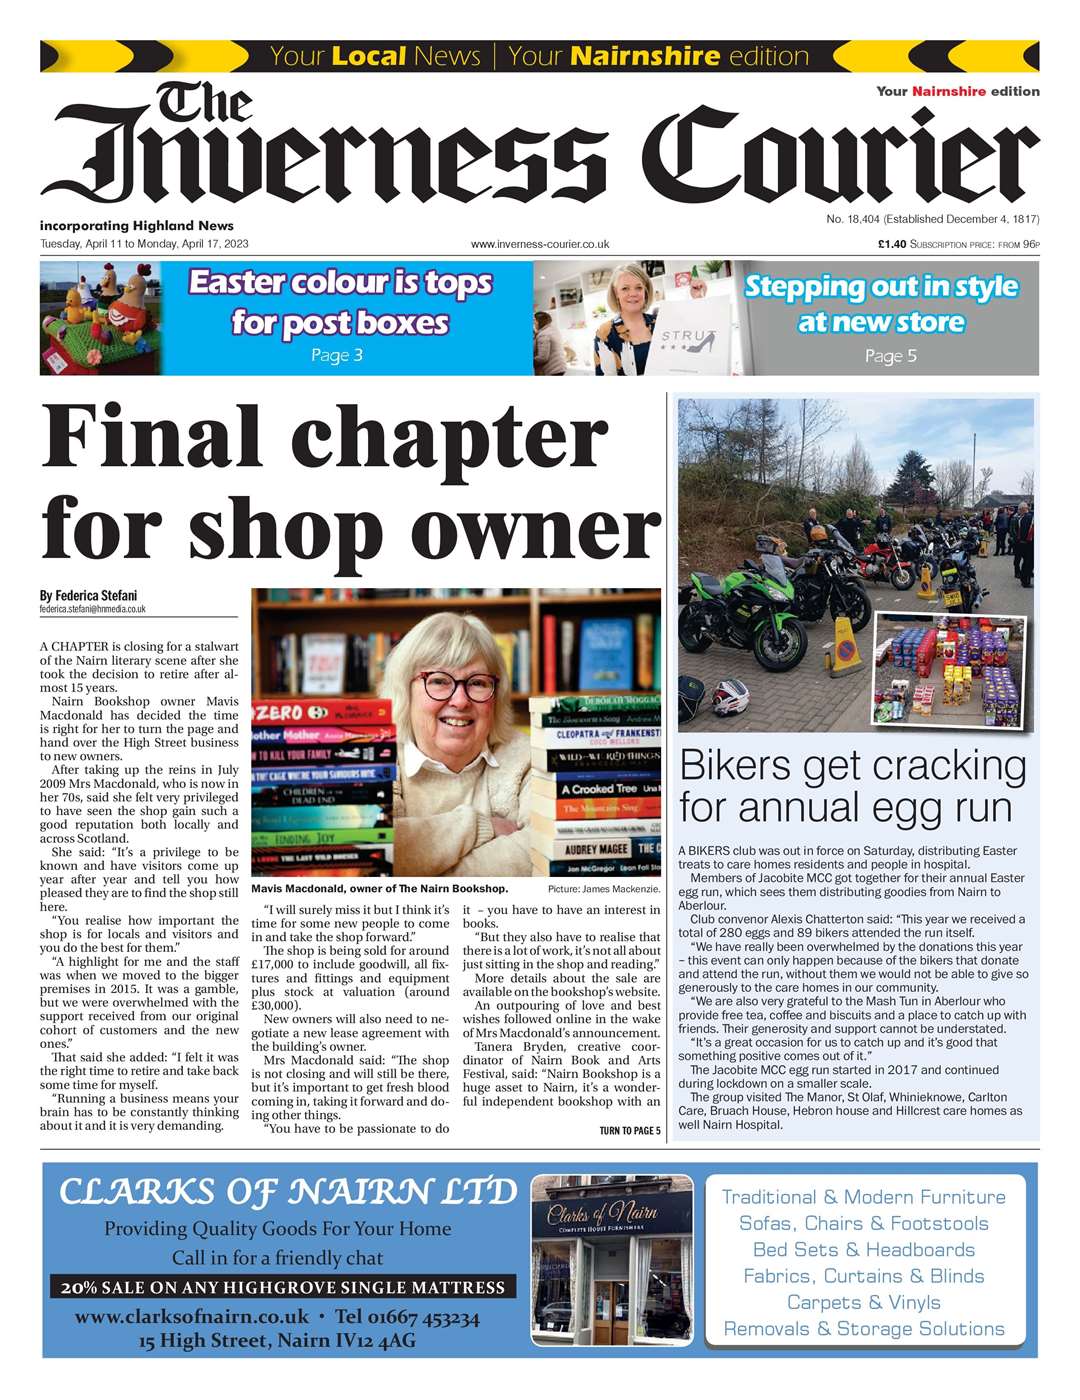 The Inverness Courier (Nairnshire edition), April 11, front page.